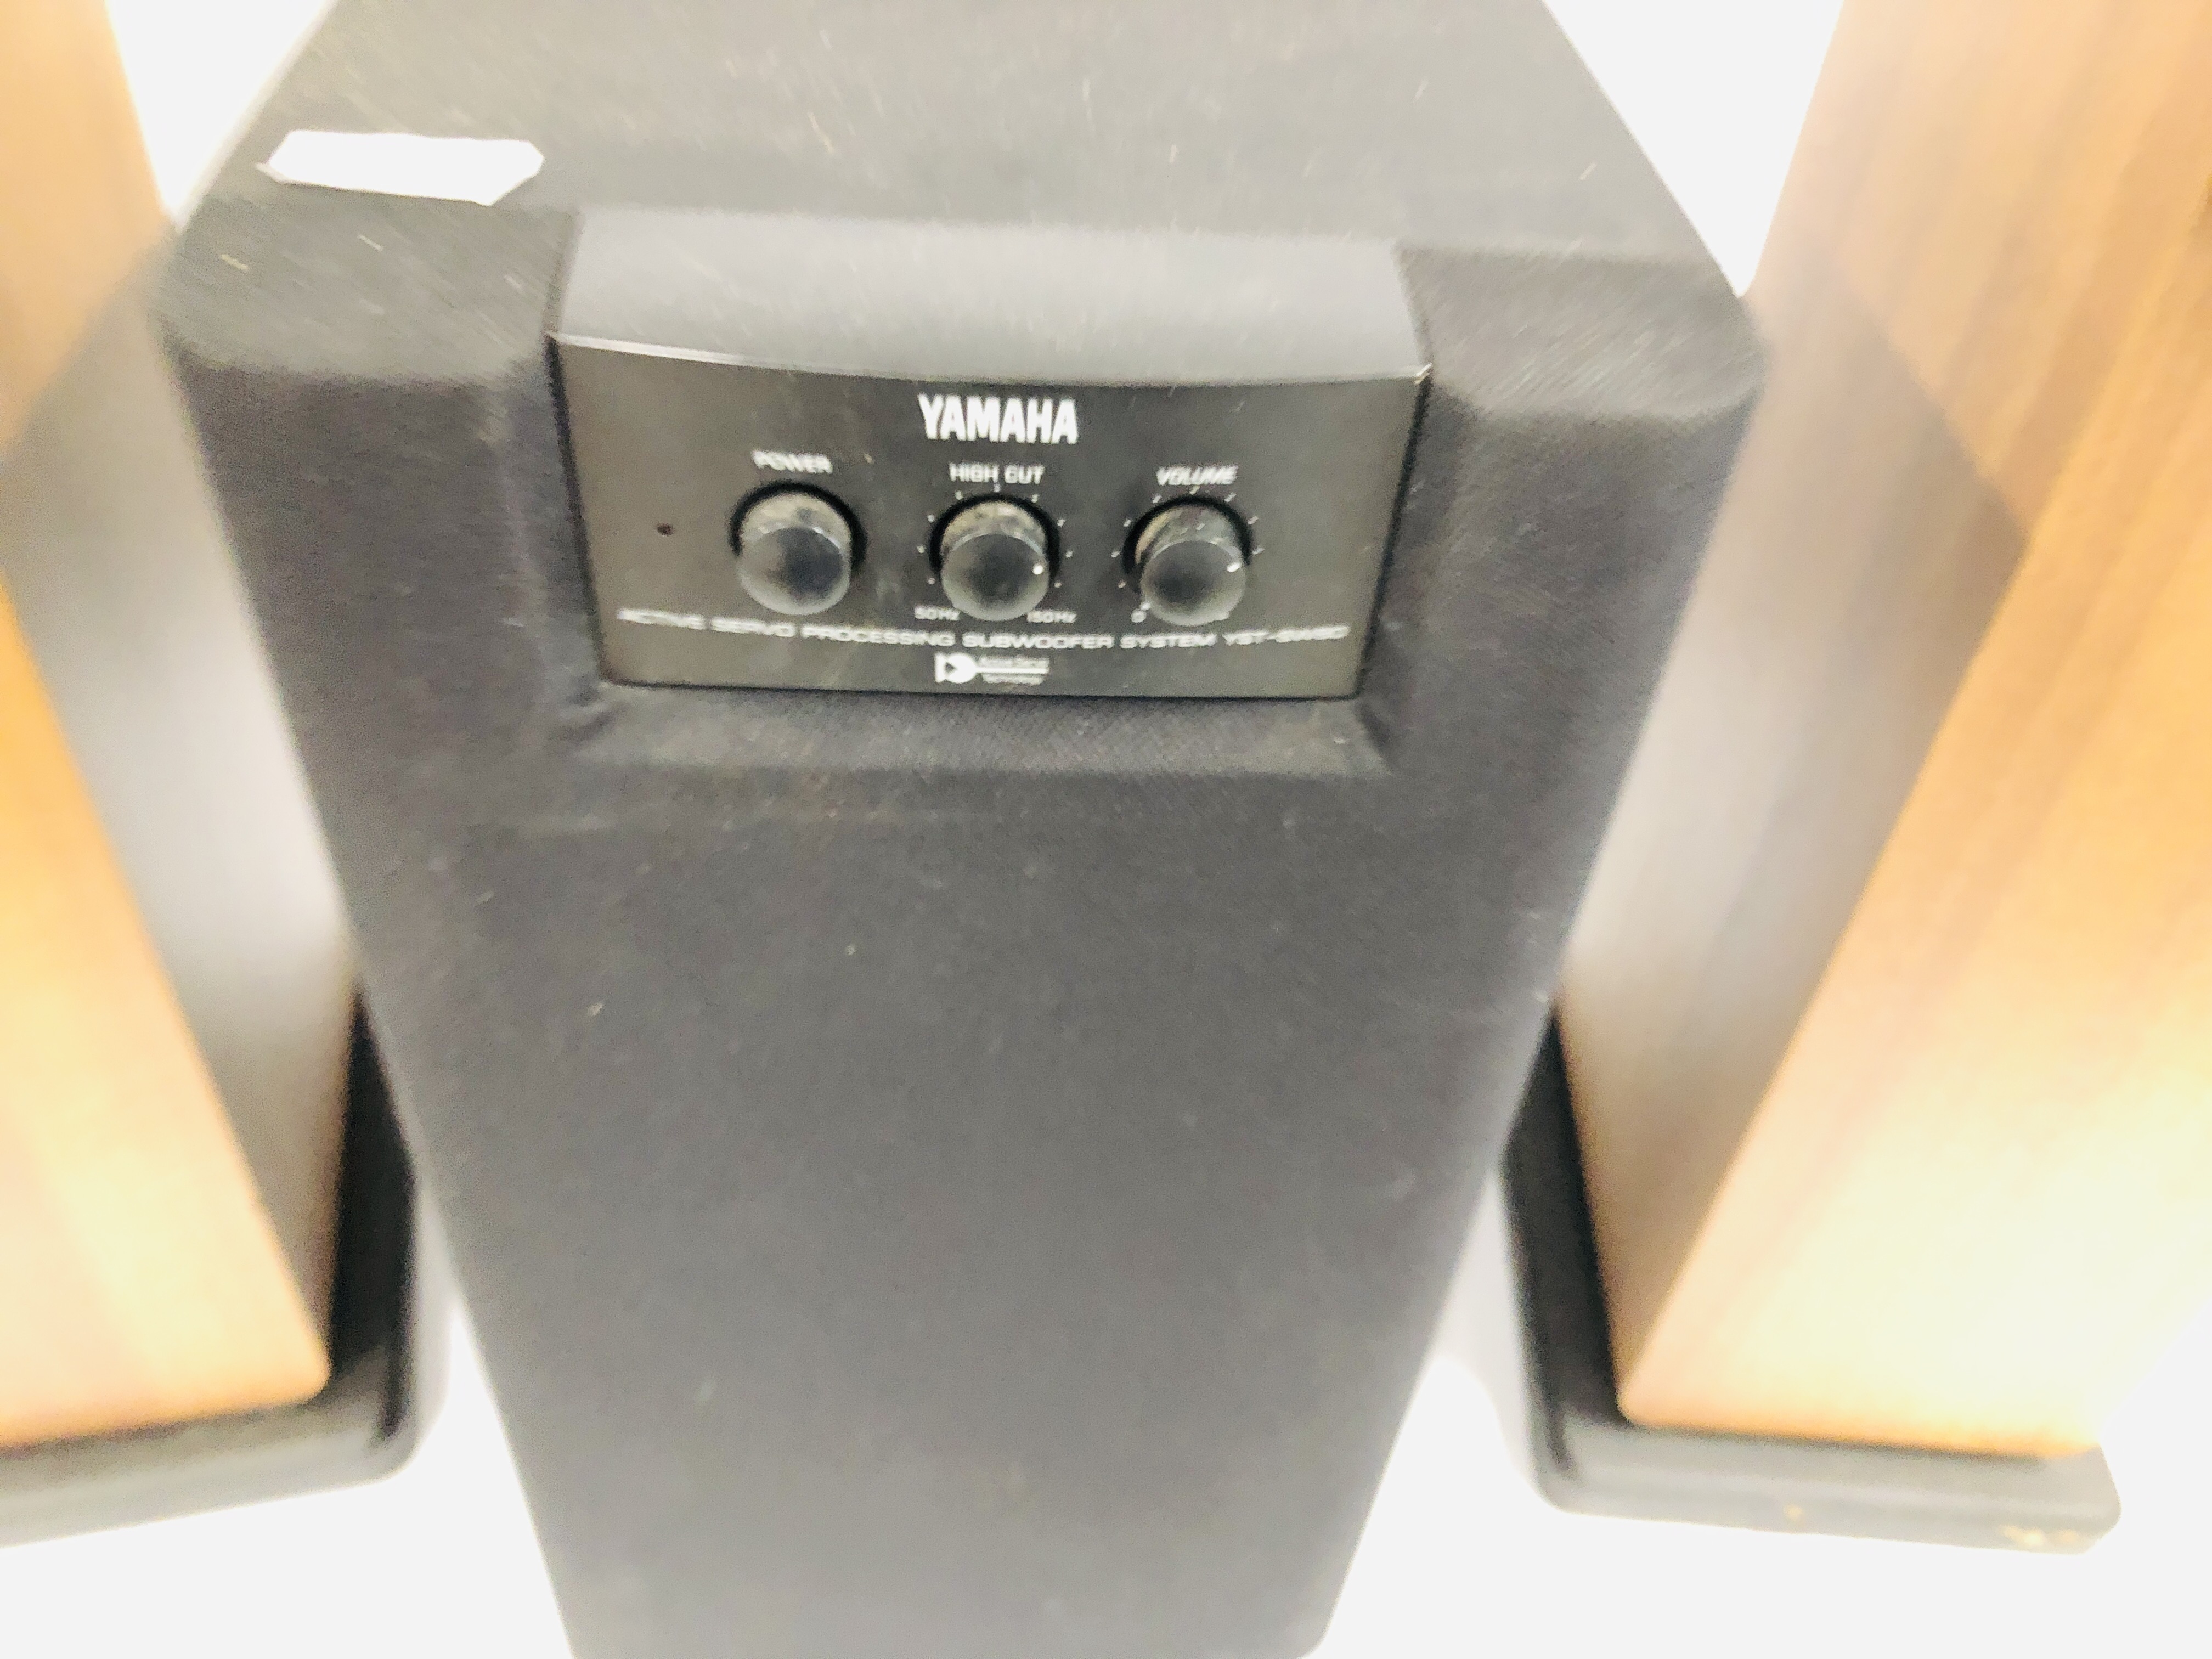 YAMAHA ACTIVE SERVO PROCESSING SUBWOOFER SYSTEM XST-SW80 ALONG WITH A PAIR OF FLOOR STANDING TIB - Image 2 of 8